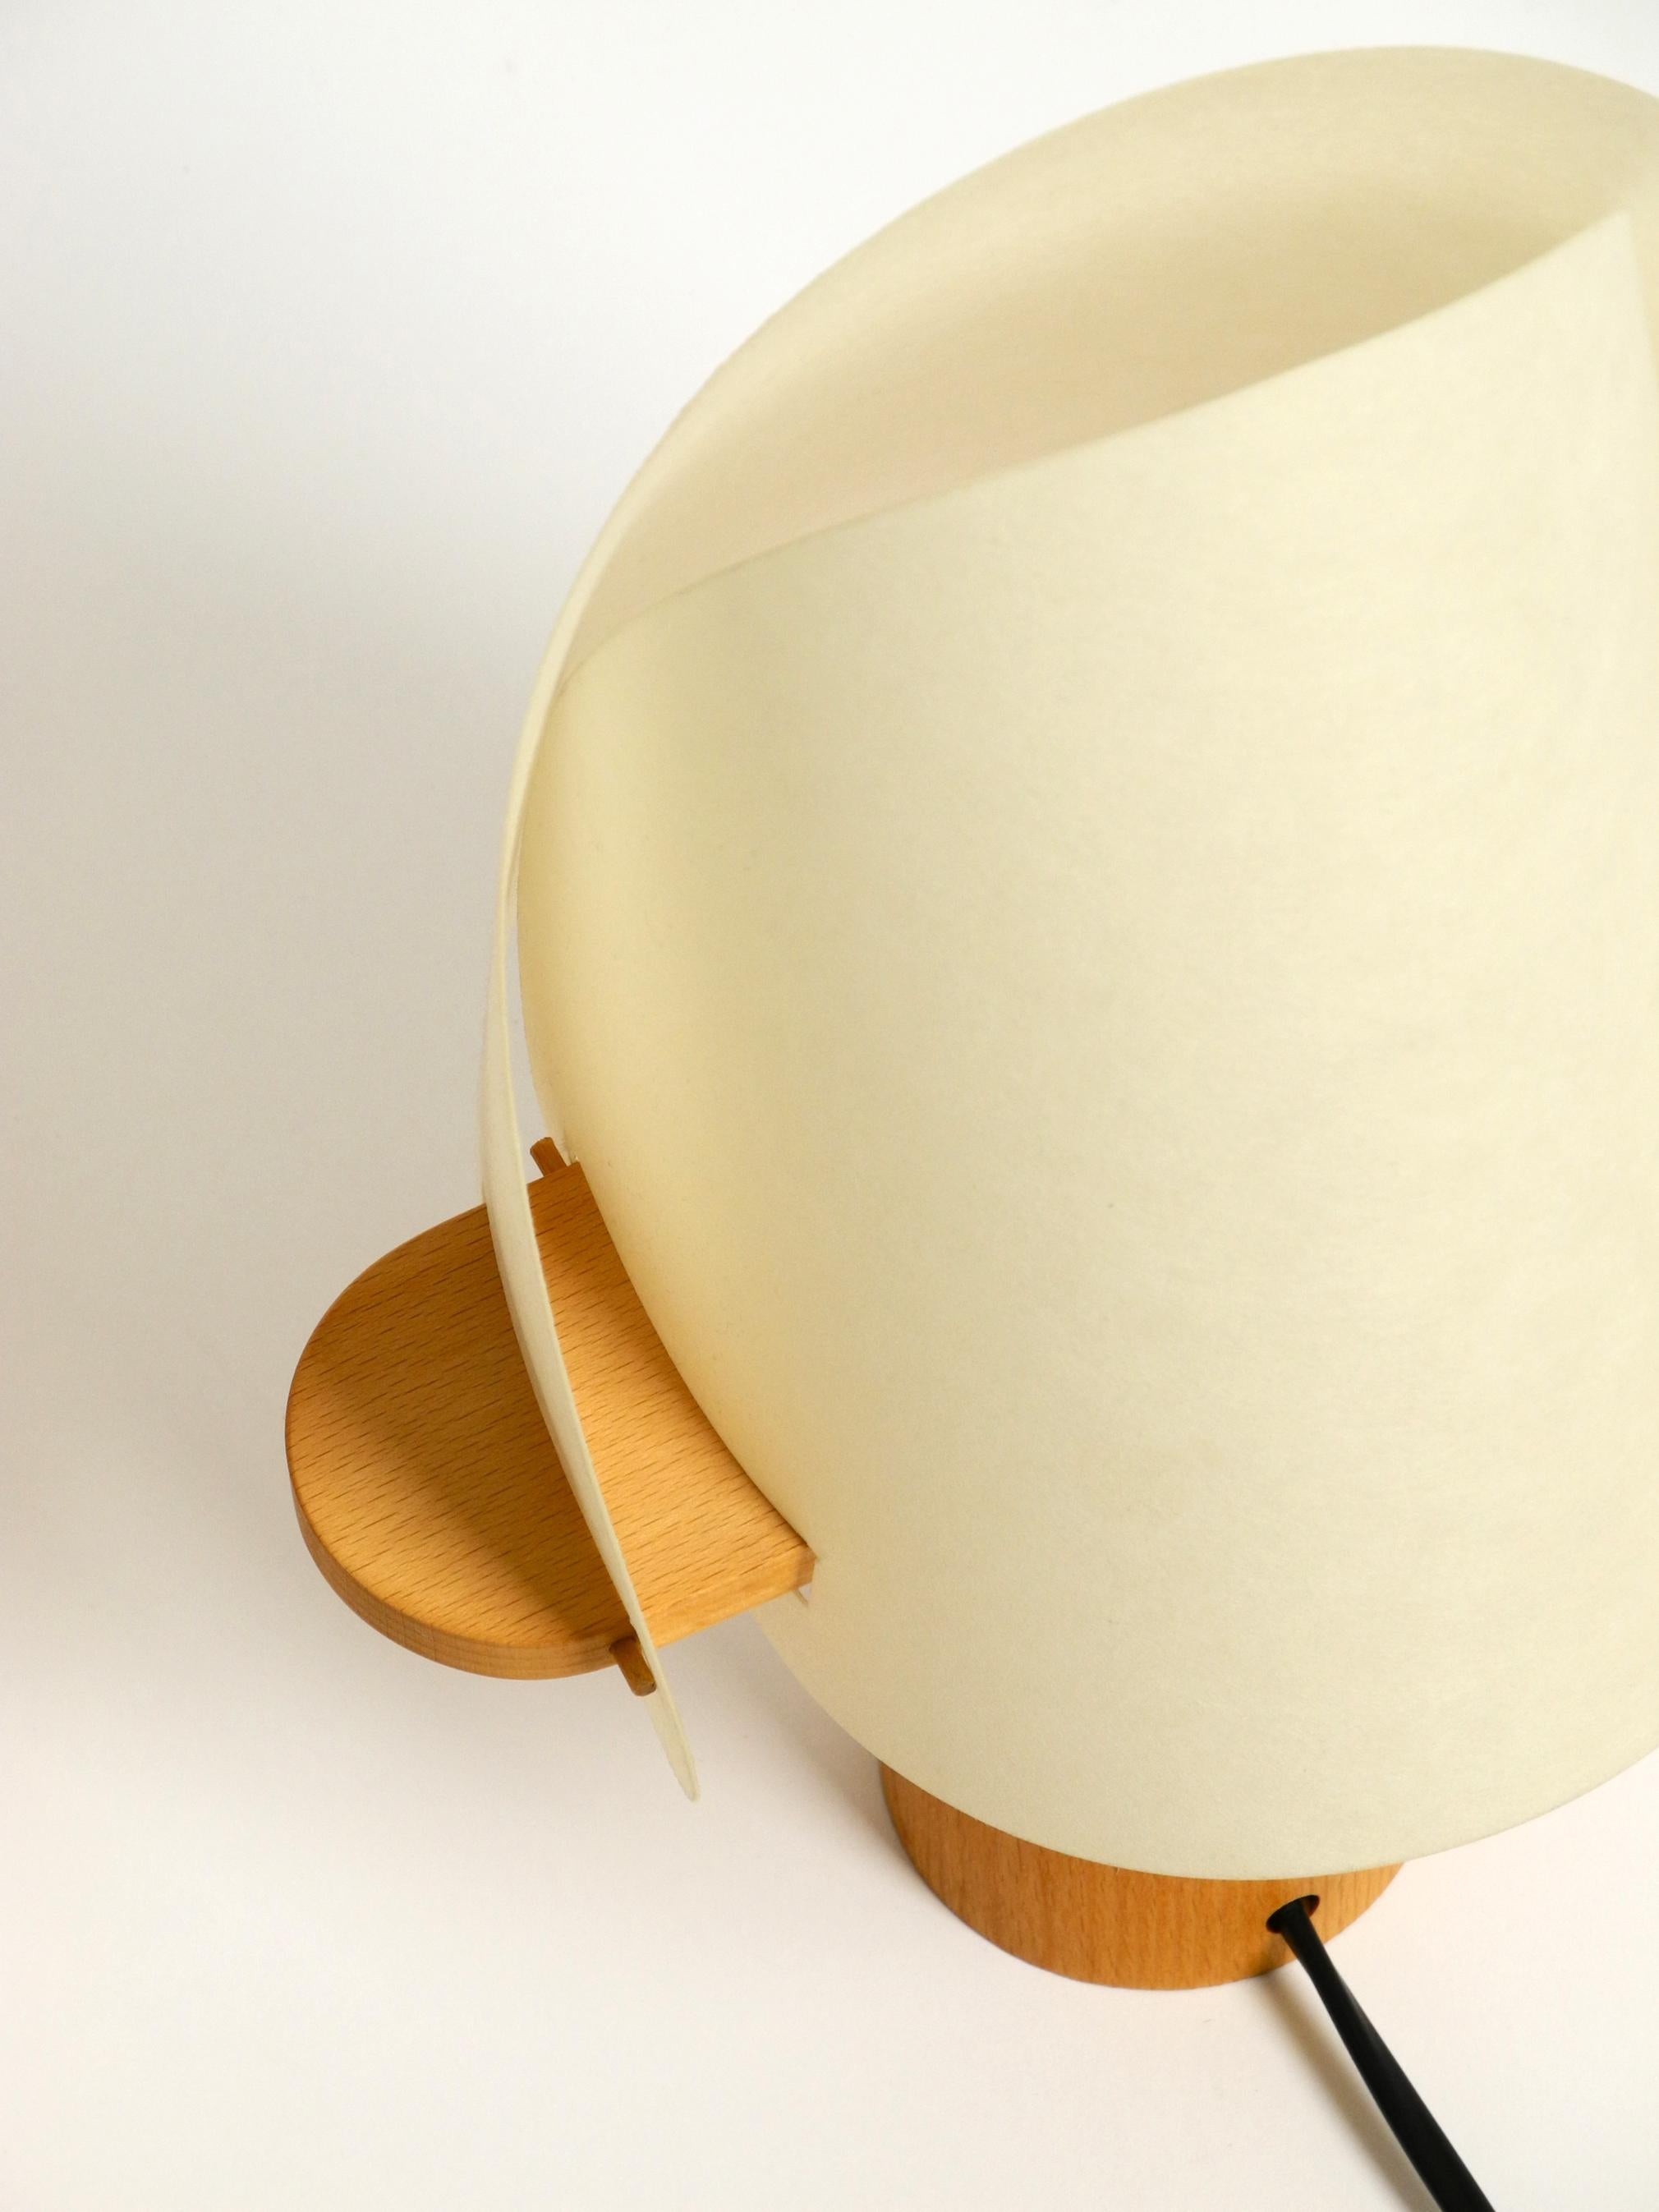 Two Charming Minimalistic Oak Table Lamps with Lunopal Shades by Domus  1980s For Sale 2